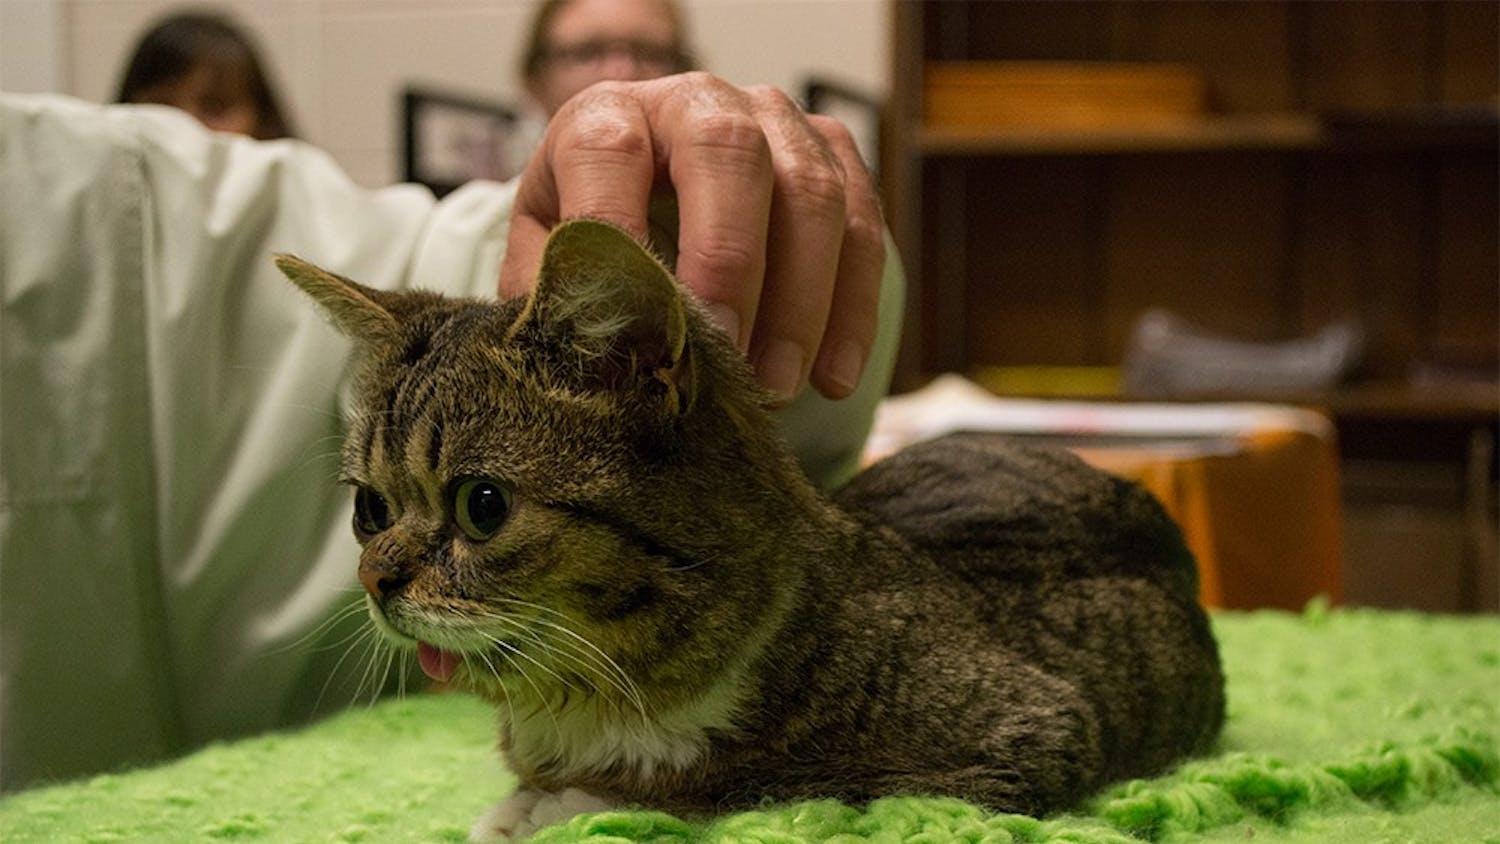 Feline celebrity Lil Bub meets with her fans Friday, Oct. 26, 2012 in the Bloomington Animal Care and Control's shelfter. Bub's "dude," Mike Bridavsky, owner of Russian Recording, brought Bub to the shelter for a meet-and-greet to promote its adopt-a-thon.